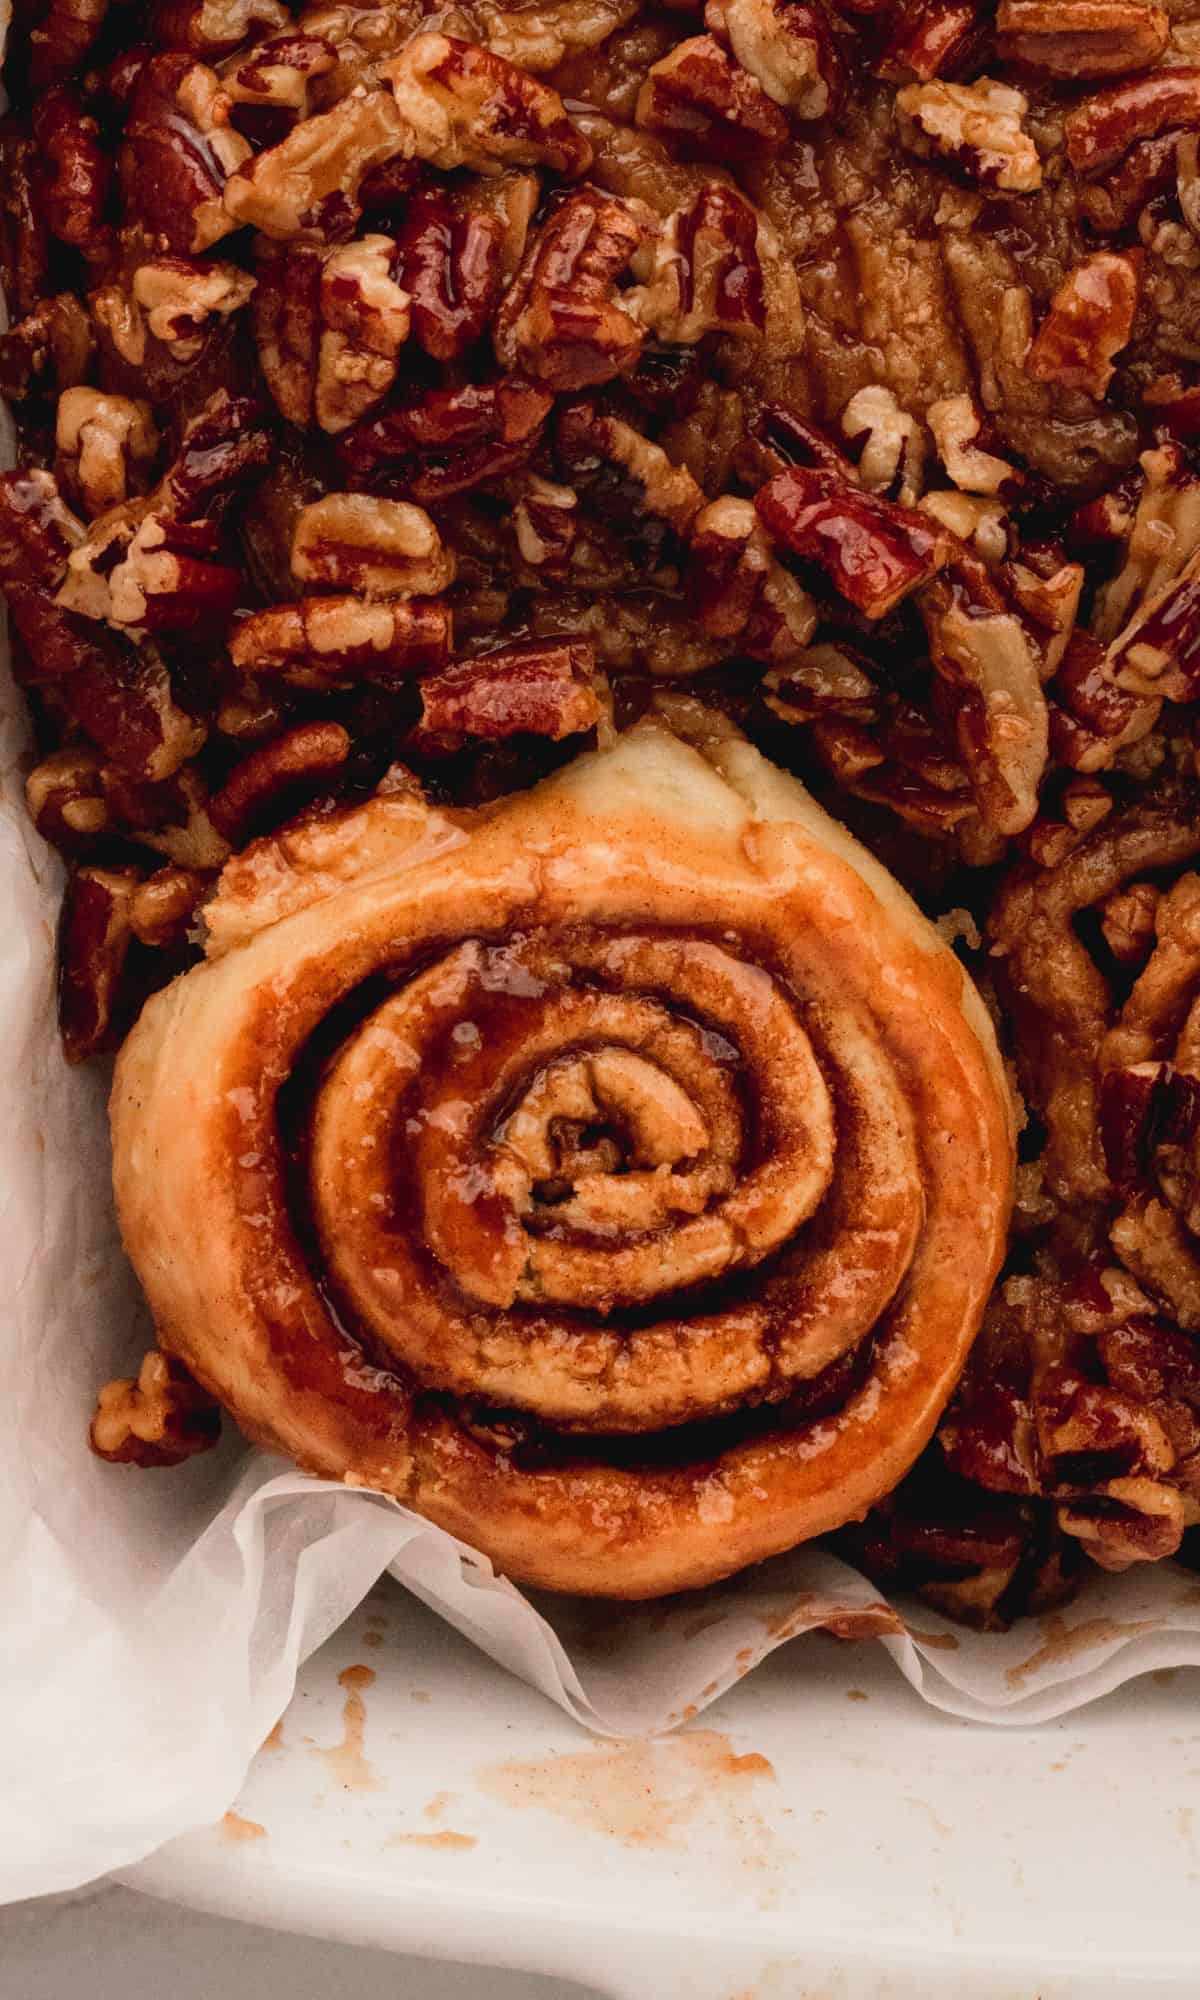 Caramel pecan sticky buns in a white baking dish.